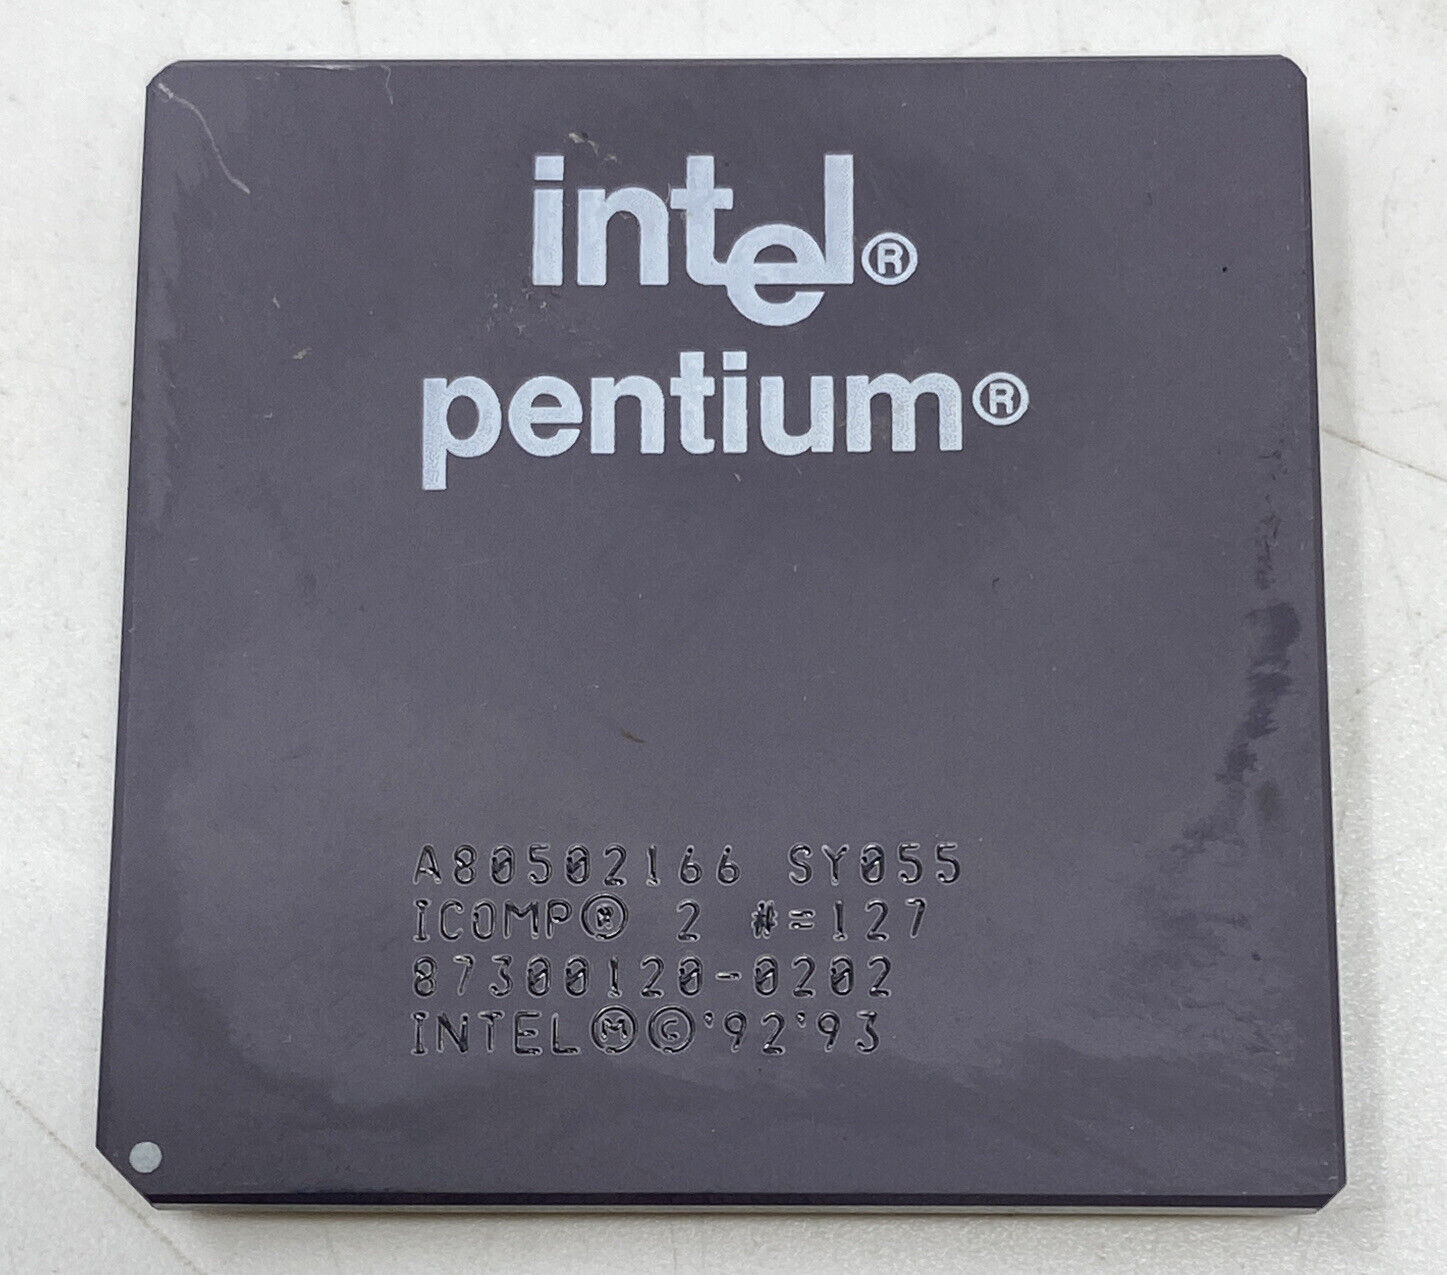 Intel Pentium A80502166 SY055  166MHZ Processor GOLD Pins Tested & Works